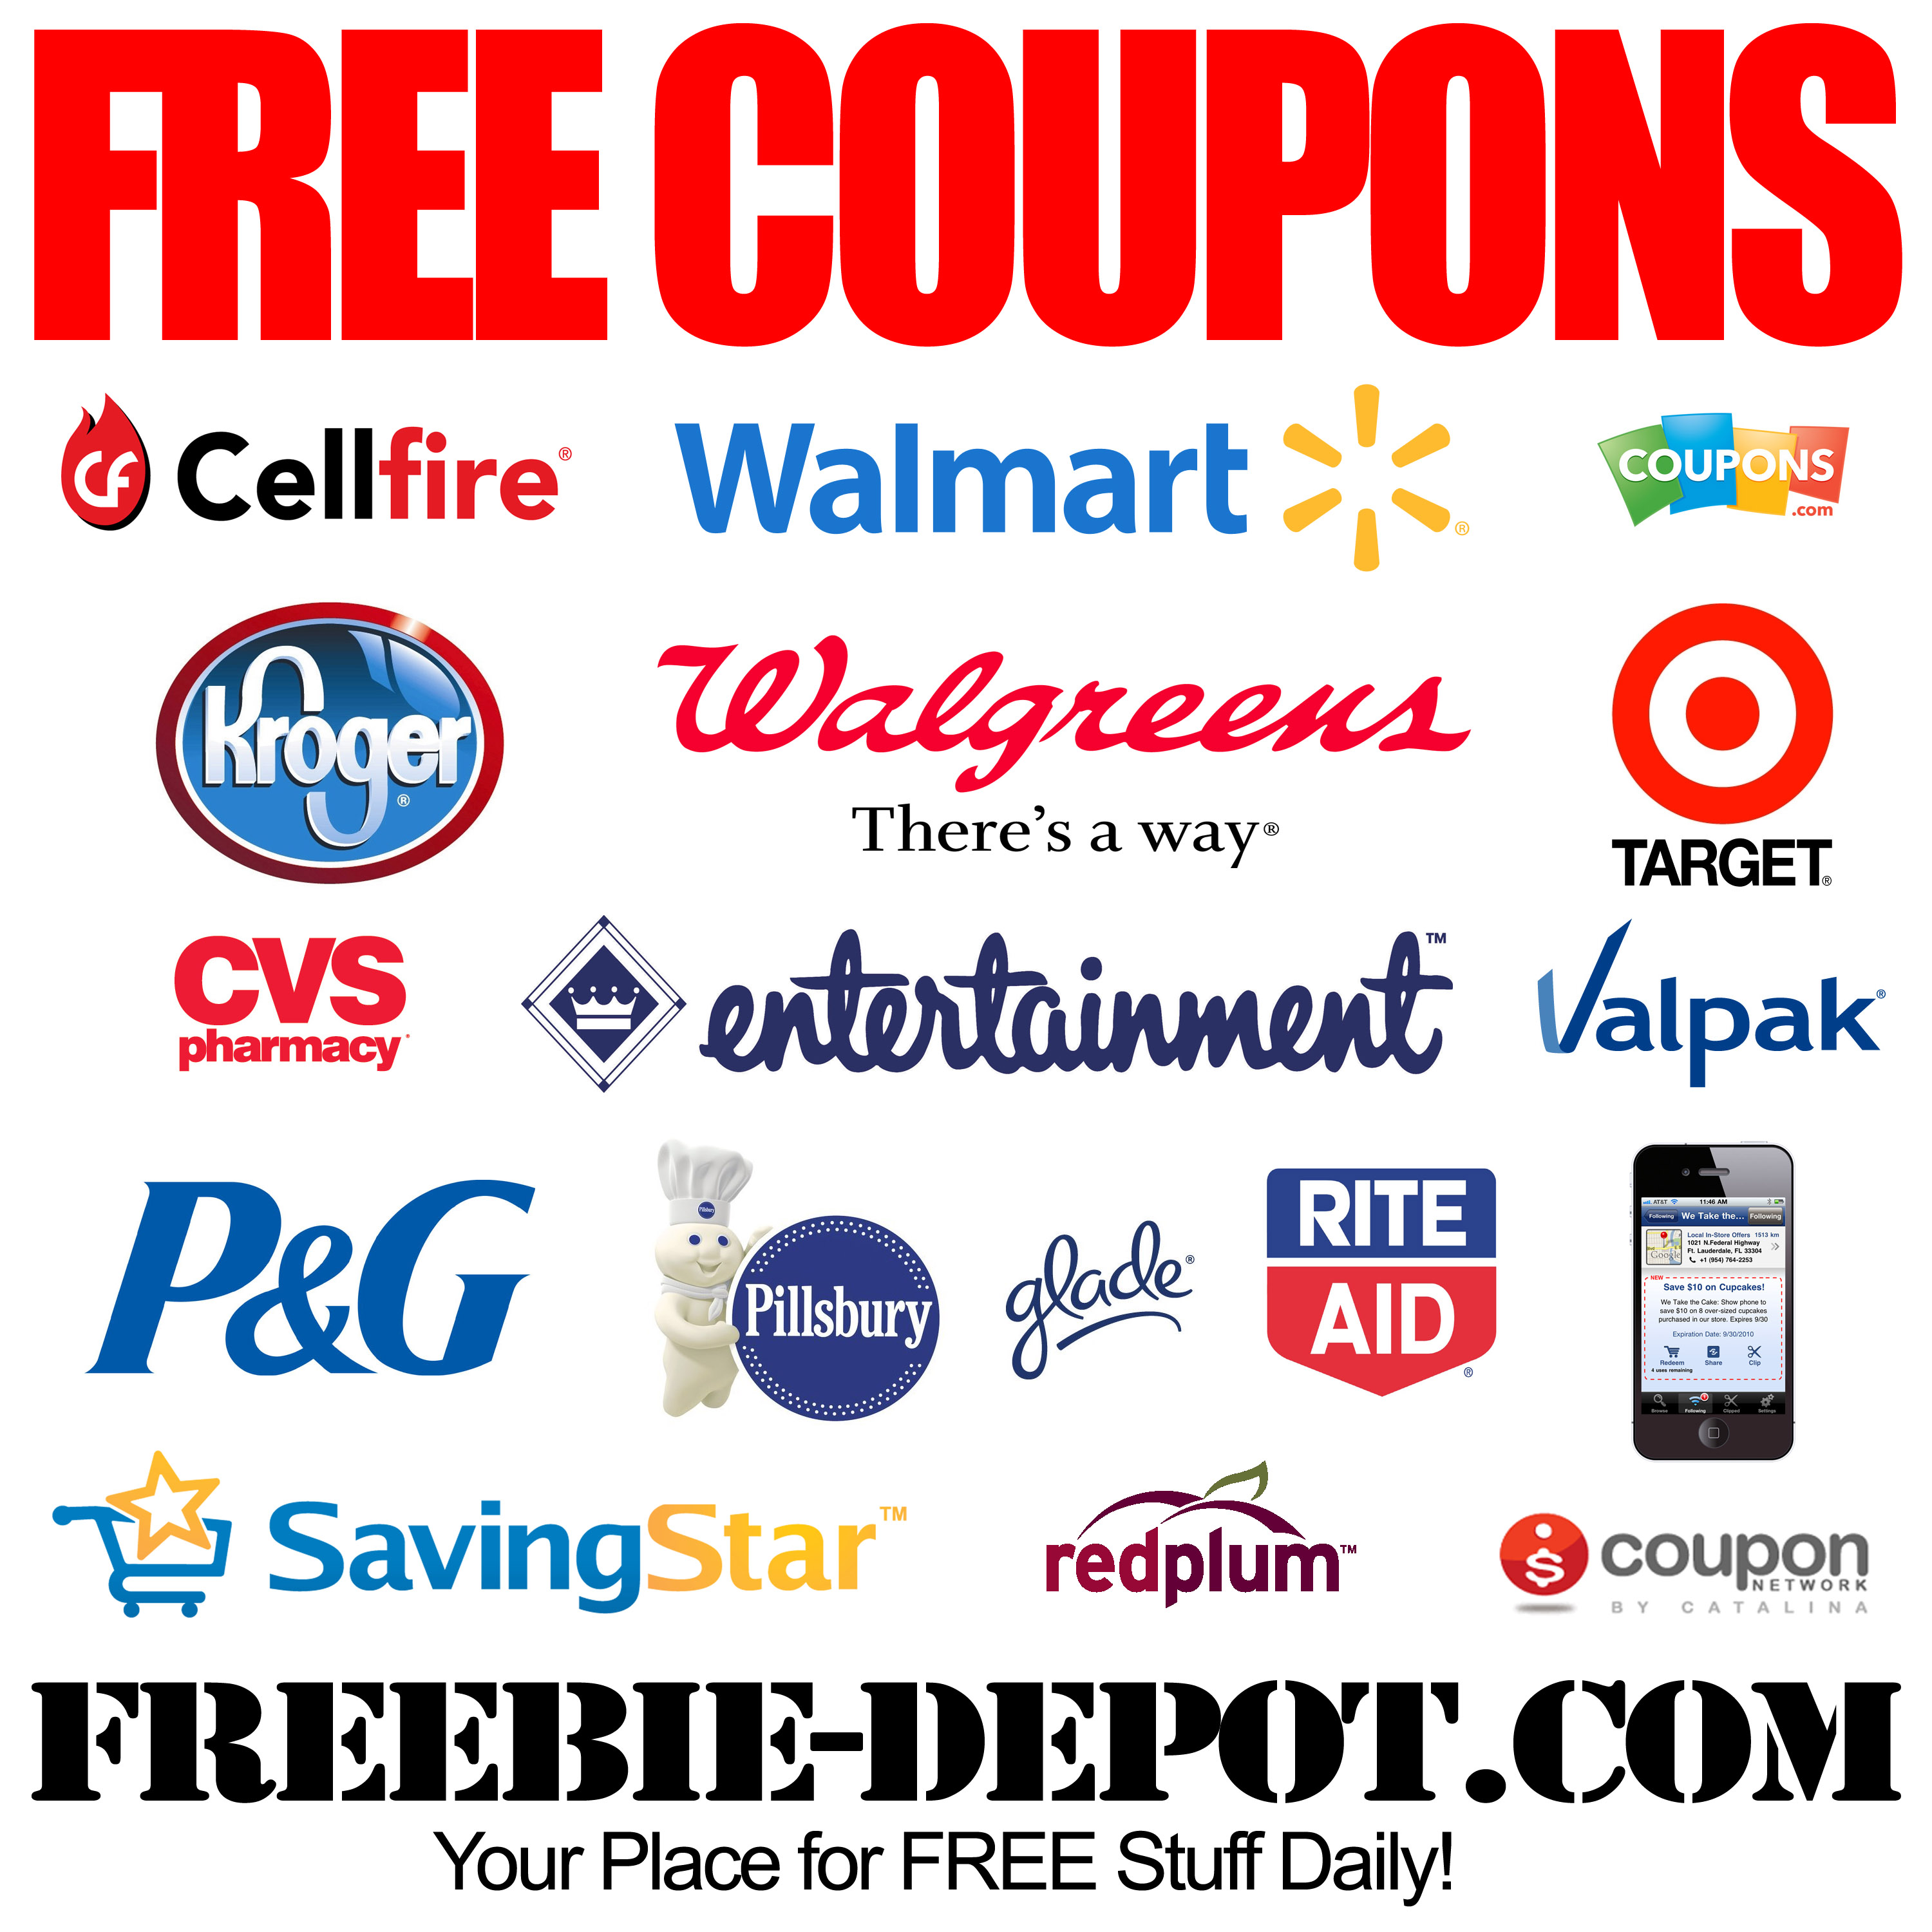 free-coupon-maker-template-of-printable-coupons-tickets-vouchers-diy-by